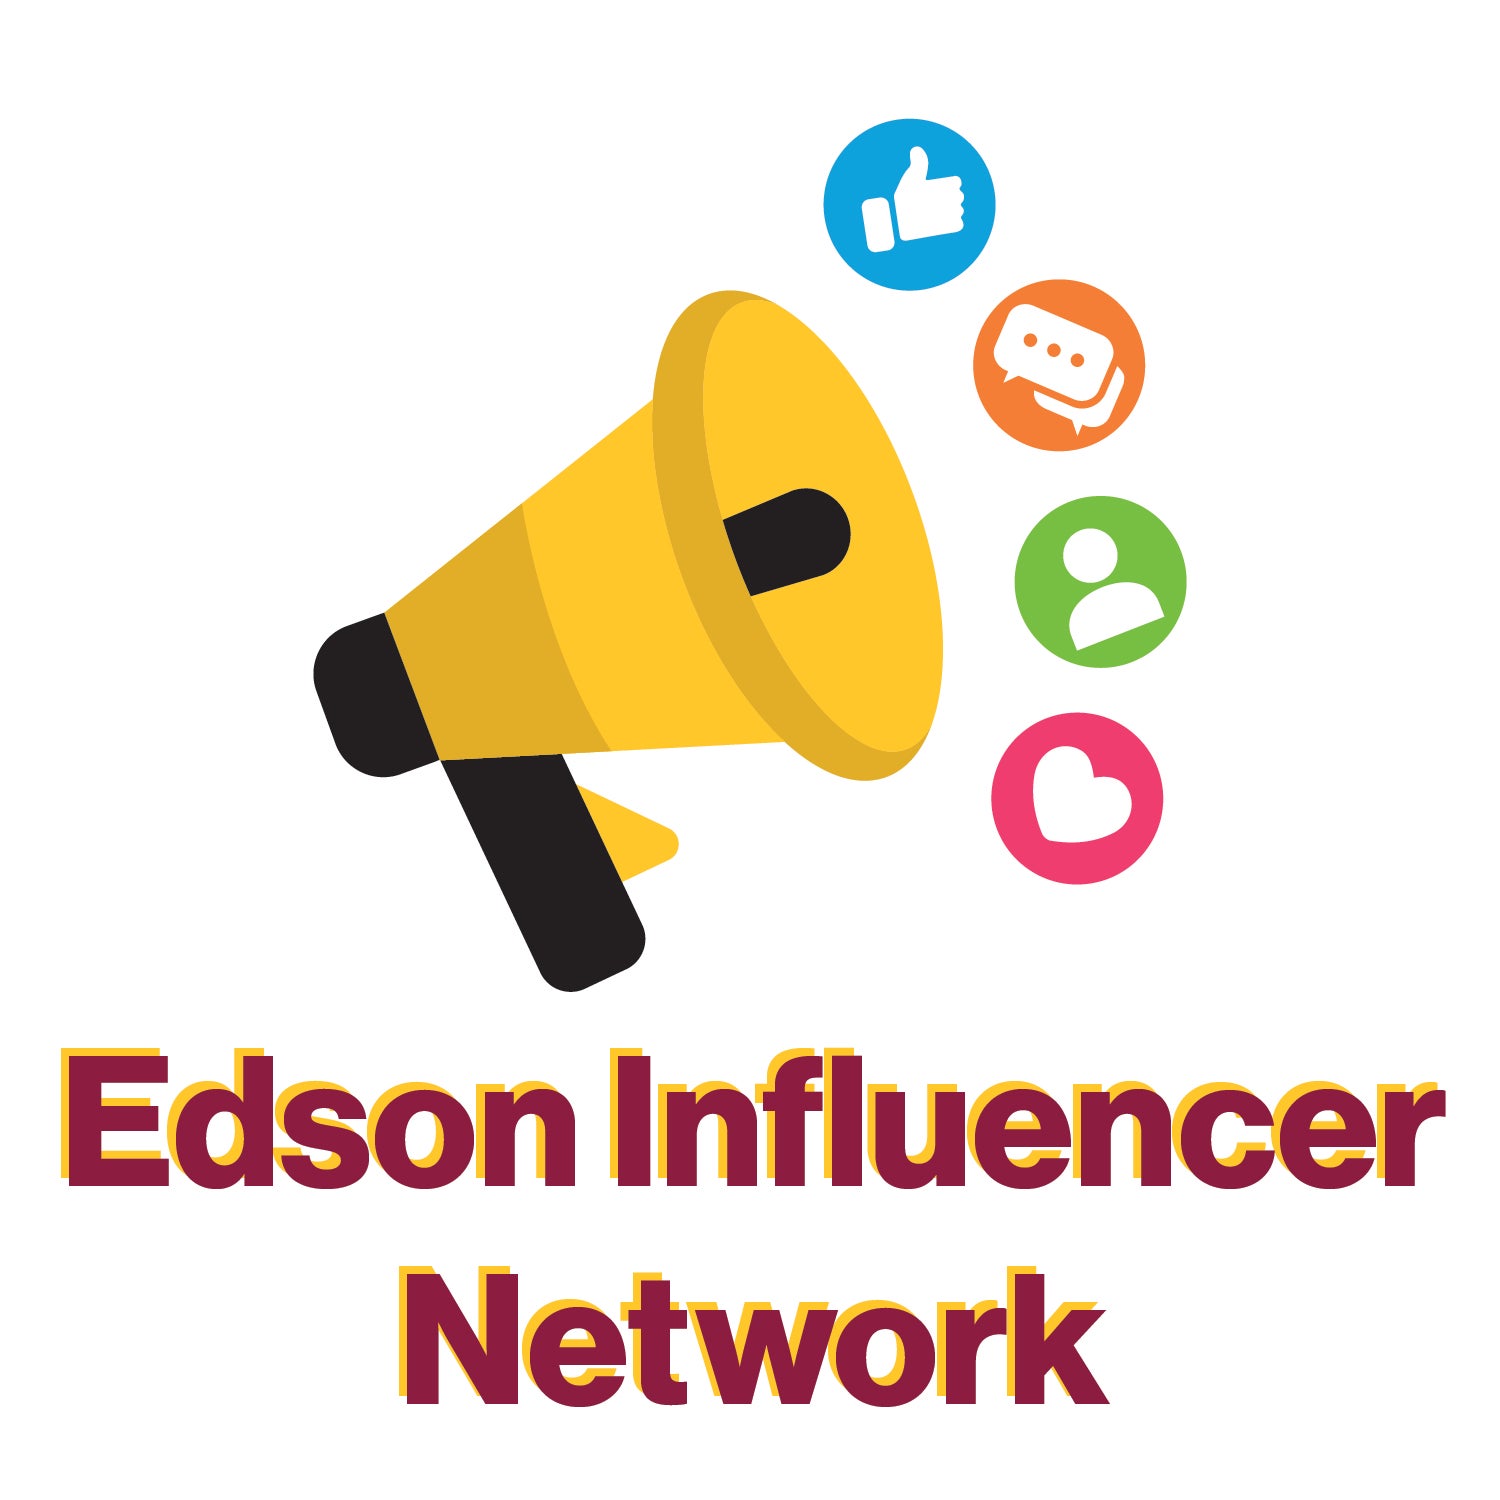 Edson Influencer Network logo of bullhorn talking about different topics